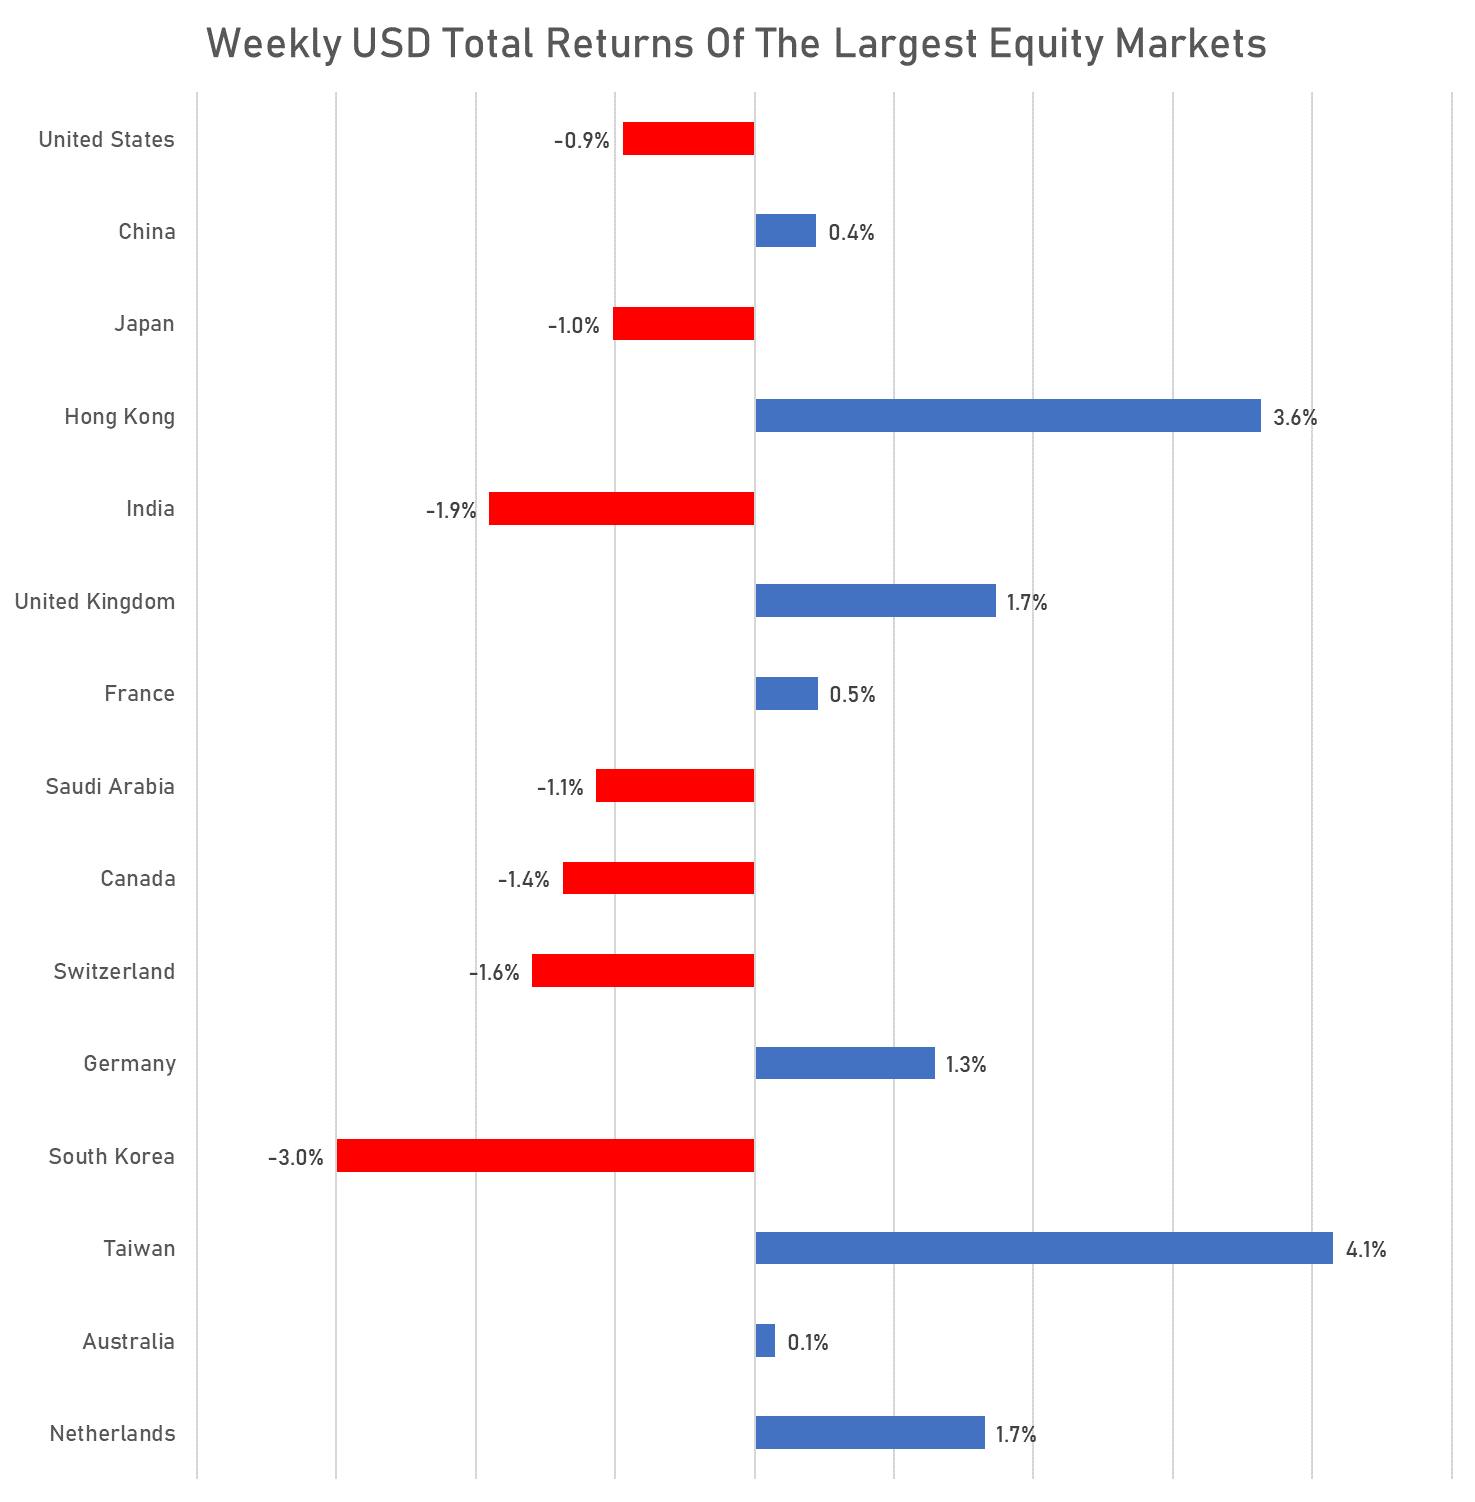 Weekly USD Total Returns Of the largest global equity markets | Sources: phipost.com, FactSet data